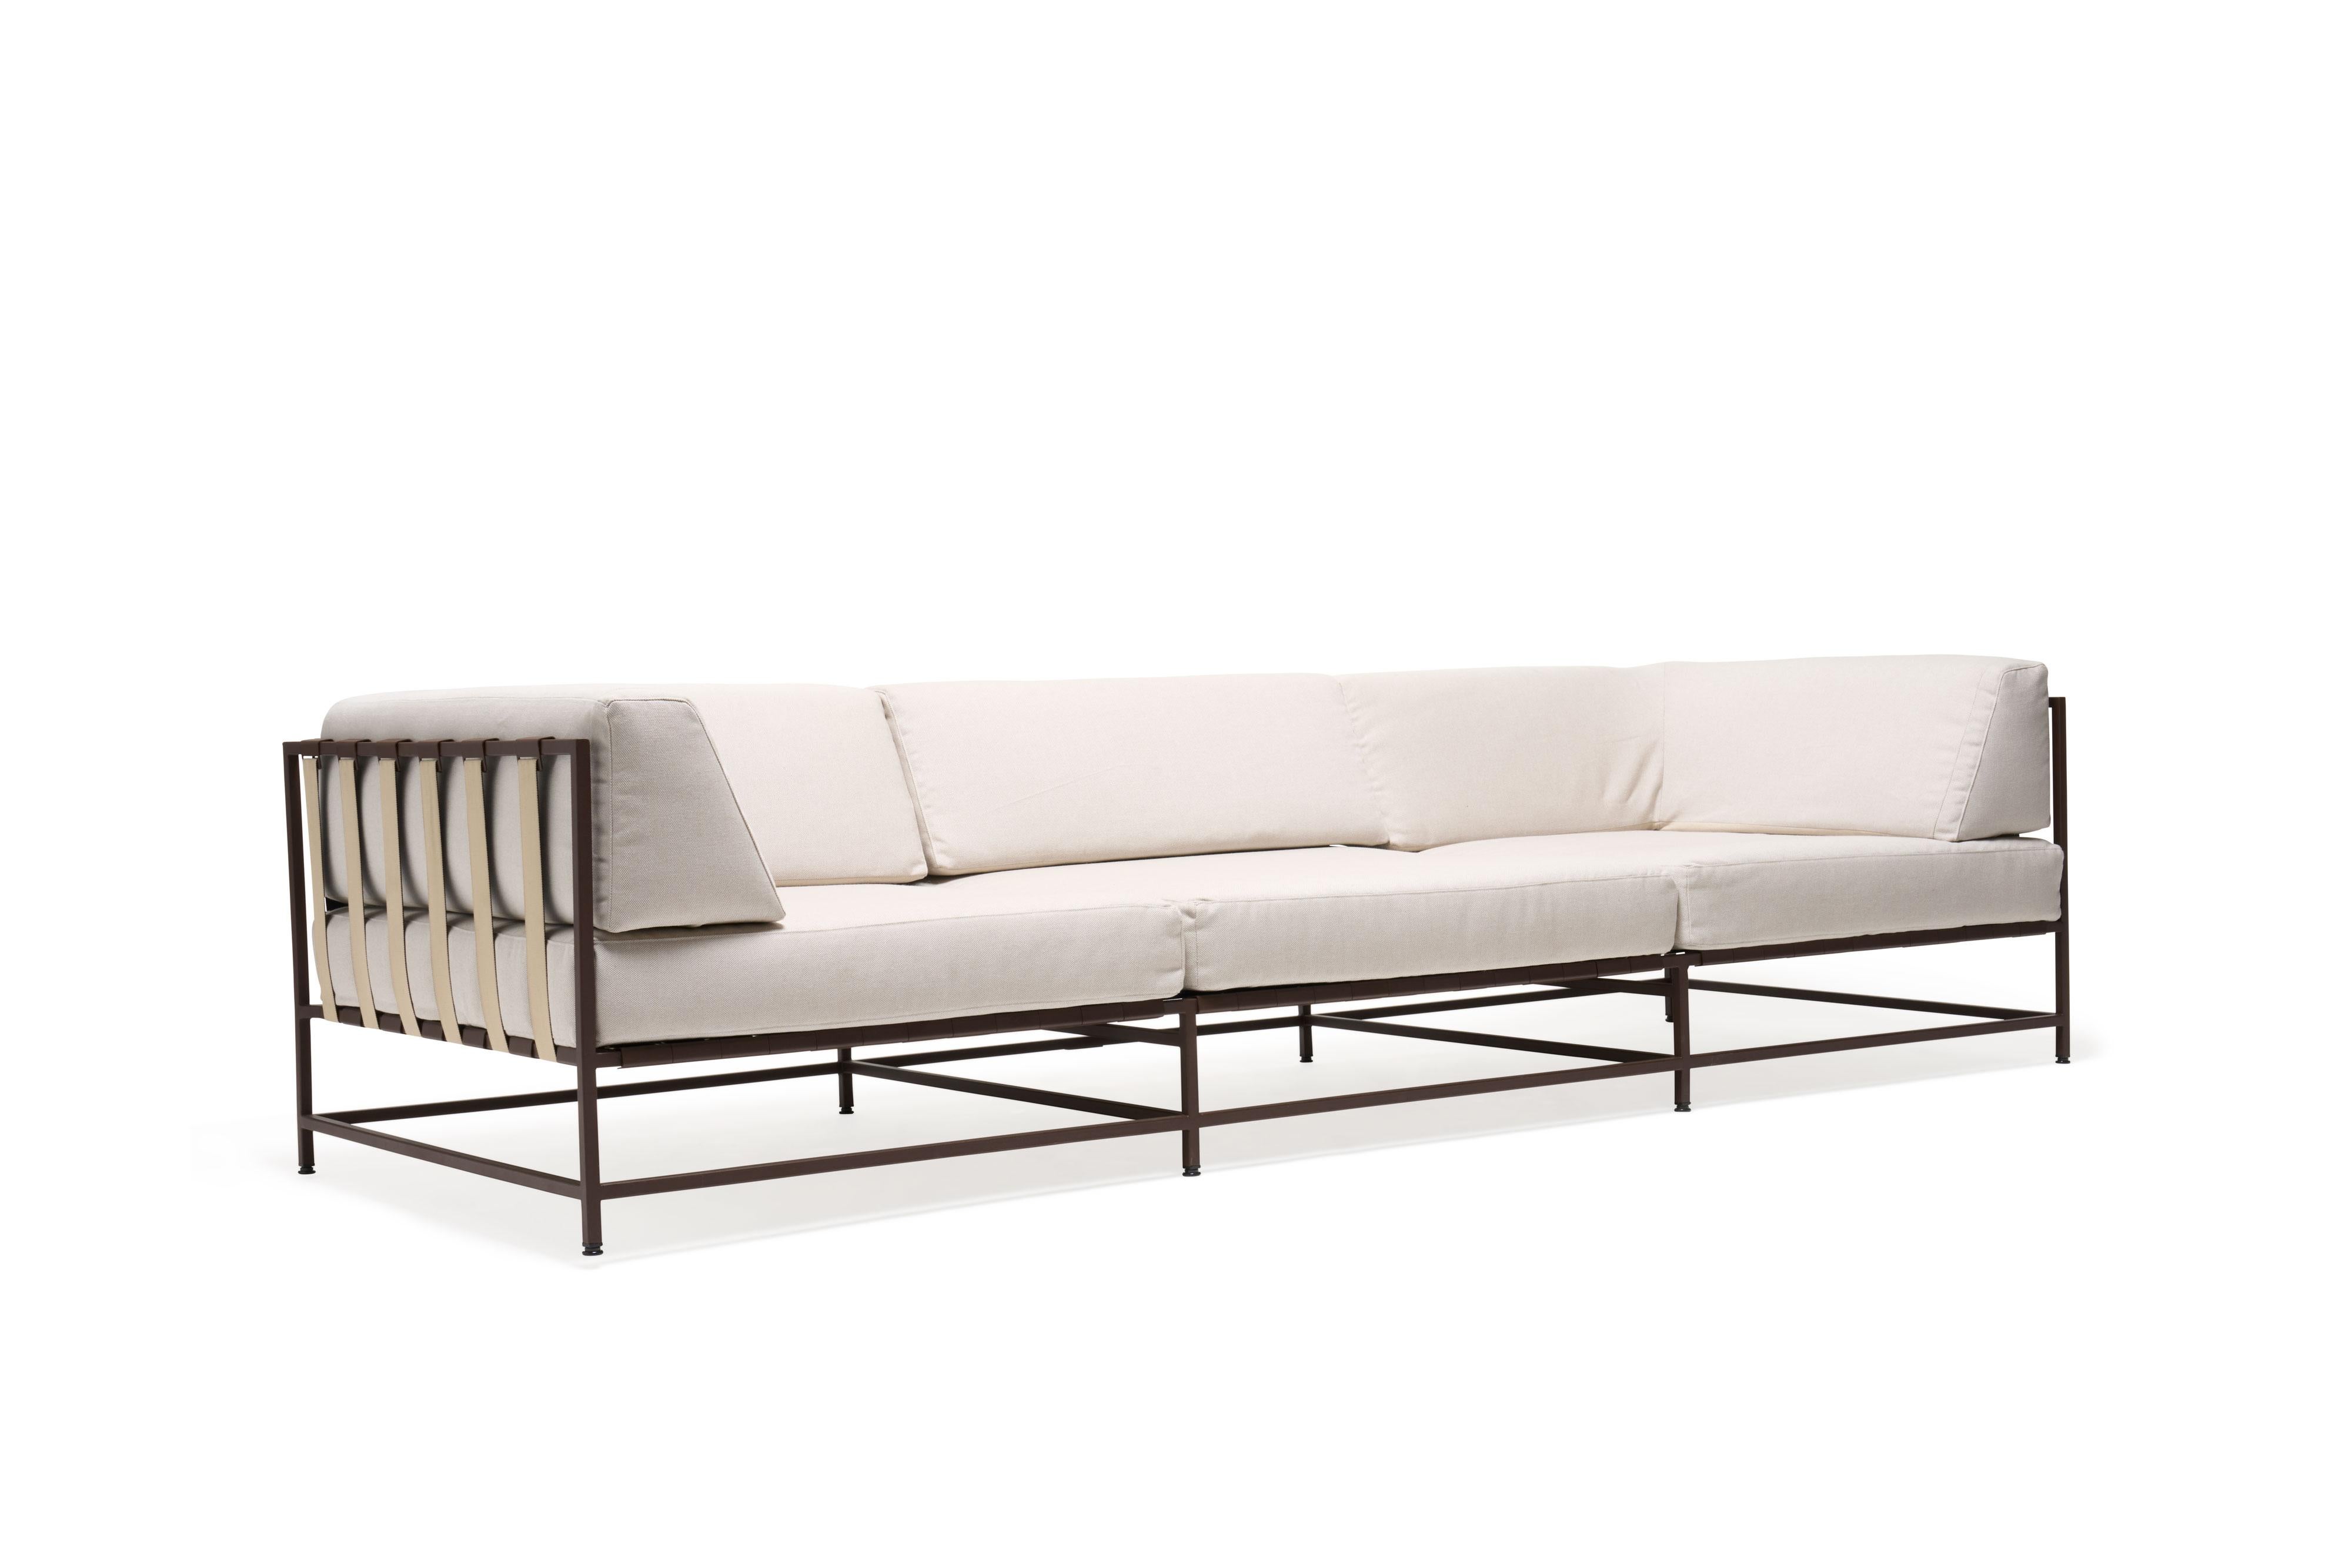 The Outdoor Collection Sofa was designed to be as comfortable as it is modern and durable. It can be used on its own or paired with other elements of the Outdoor Collection to create a larger sectional. The stretch webbing base creates a soft